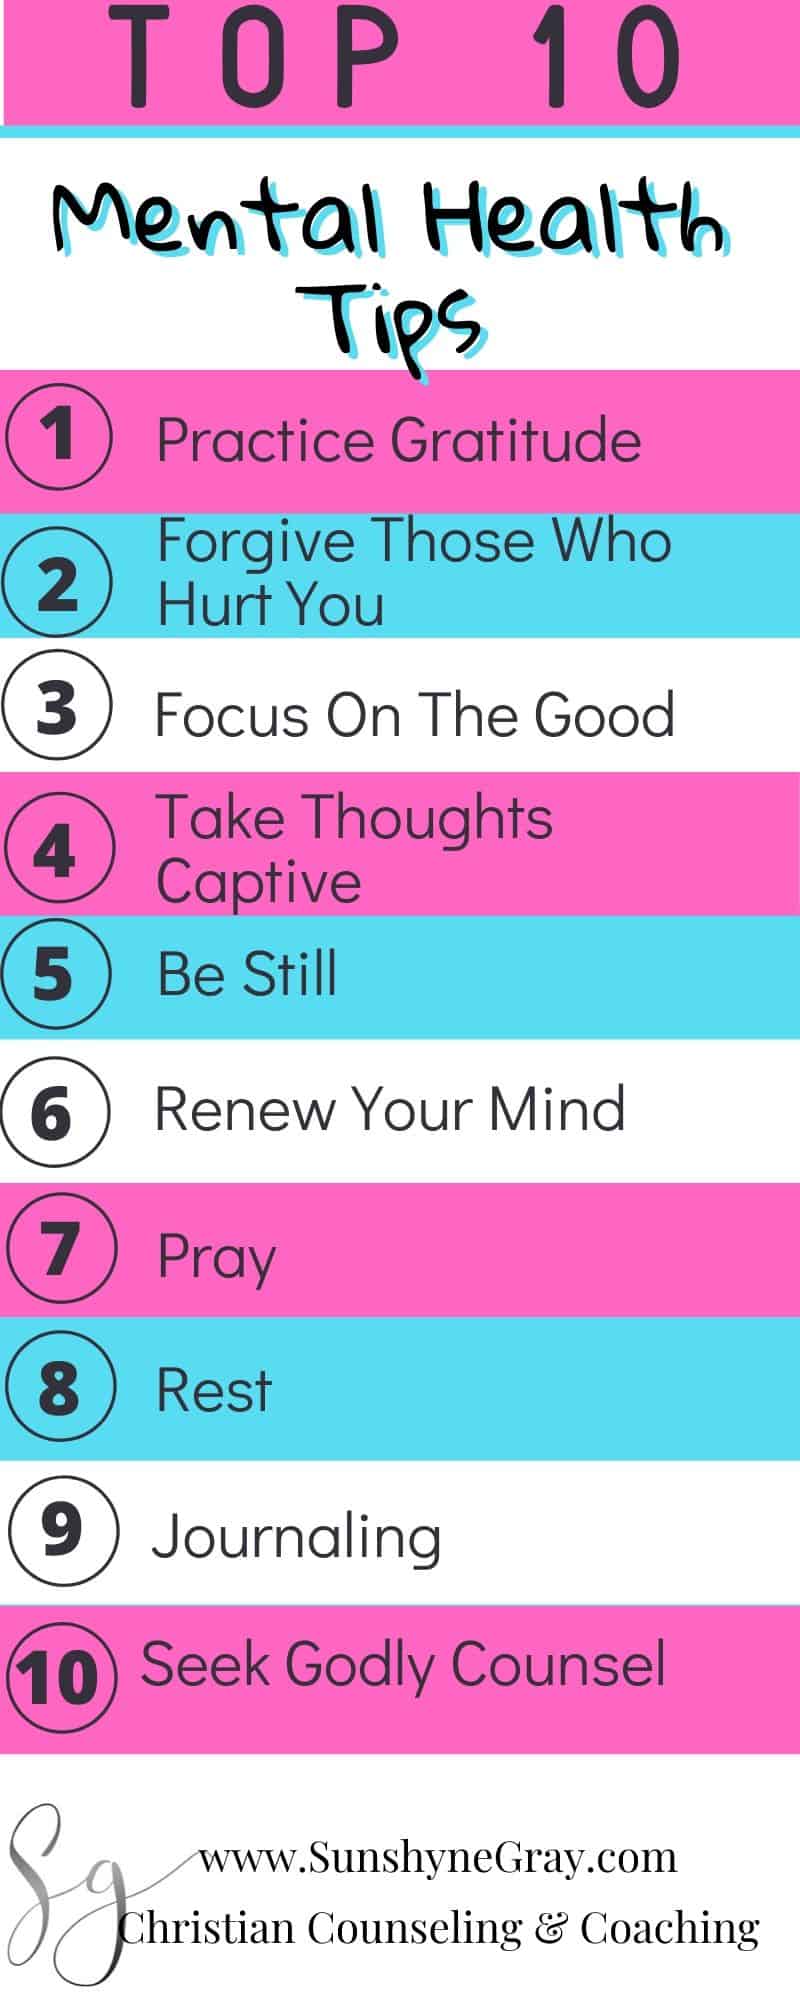 Top 10 Mental Health Tips - Christian Counseling